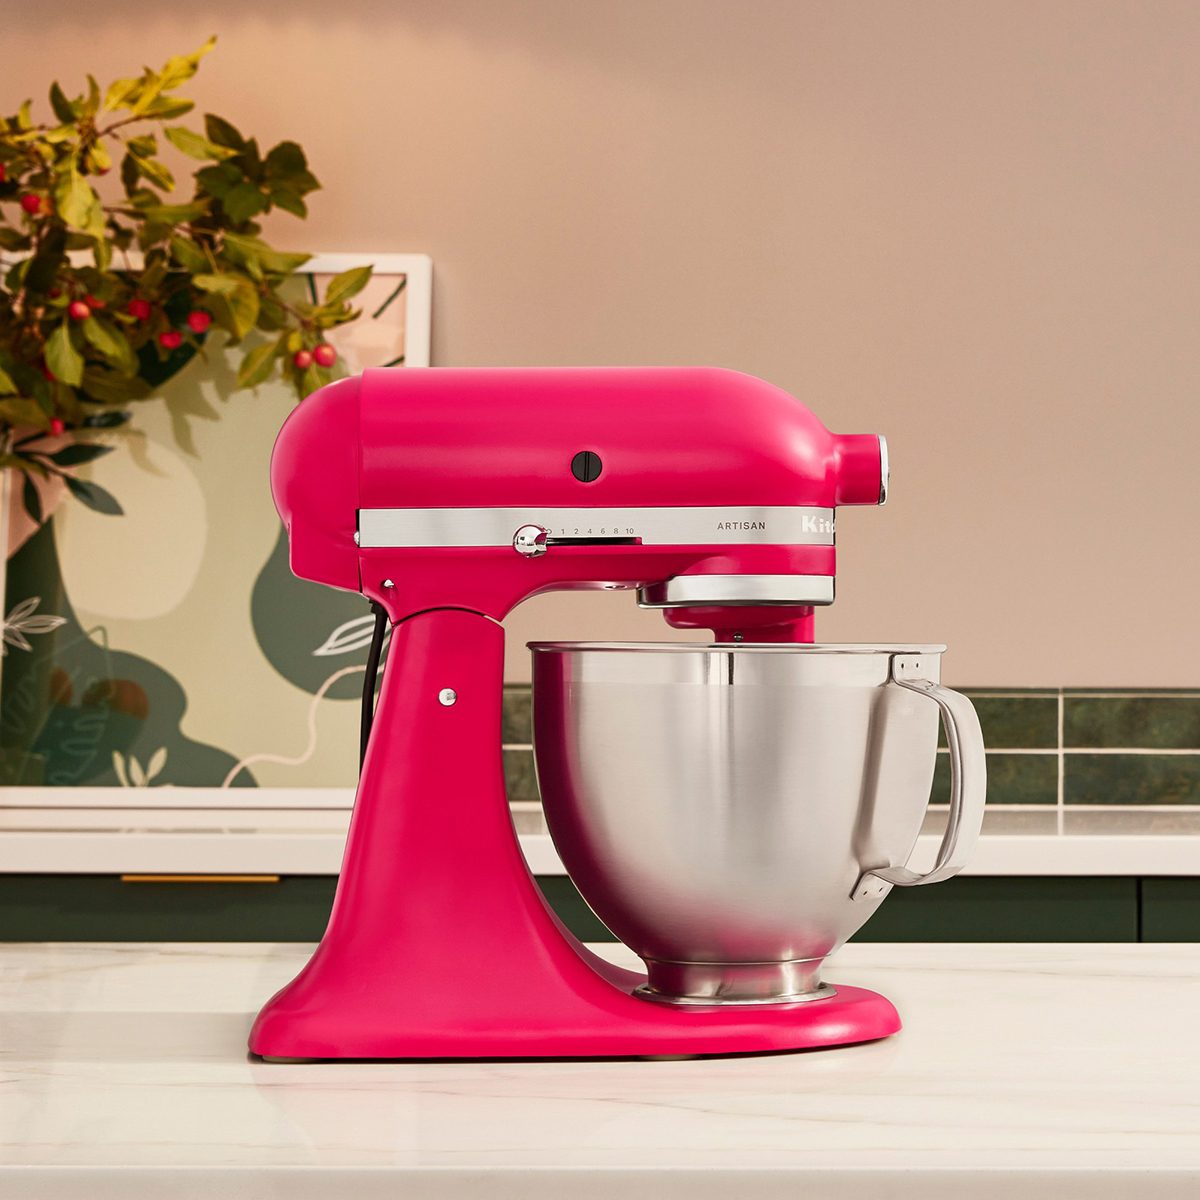 The 15 Best Barbiecore Kitchen Products of 2023